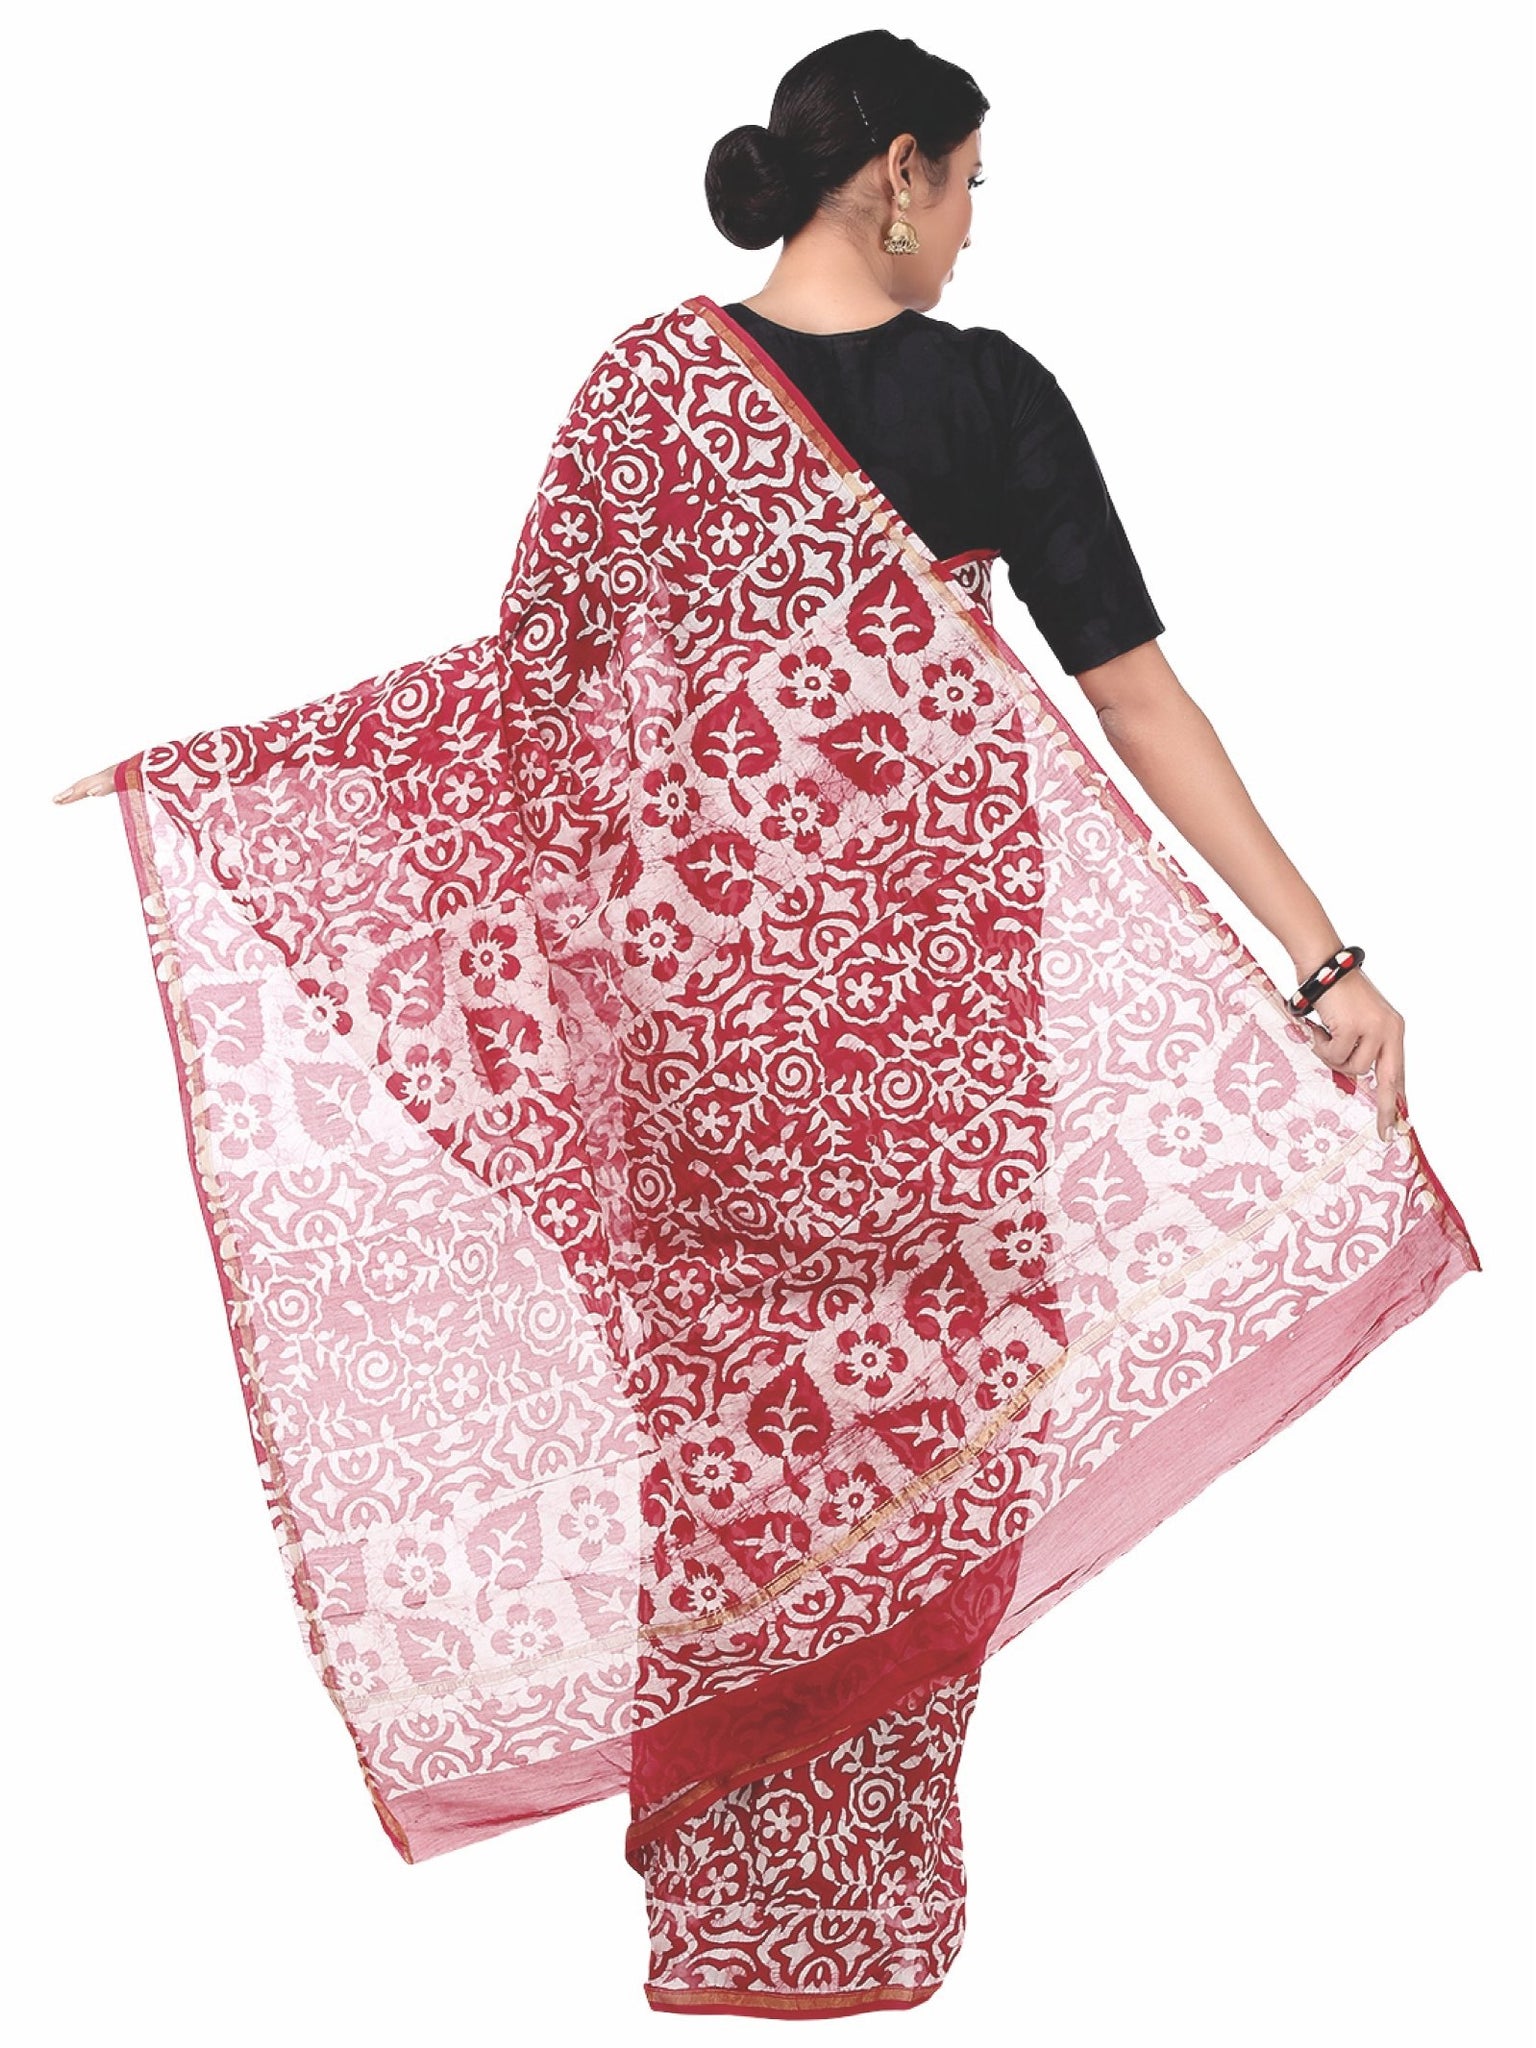 Red & White Chanderi Silk Batik Hand Block Print Handcrafted Saree-Saree-Kalakari India-RDSNSA0056-Batik, Chanderi, Geographical Indication, Hand Blocks, Hand Crafted, Heritage Prints, Sarees, Silk, Sustainable Fabrics-[Linen,Ethnic,wear,Fashionista,Handloom,Handicraft,Indigo,blockprint,block,print,Cotton,Chanderi,Blue, latest,classy,party,bollywood,trendy,summer,style,traditional,formal,elegant,unique,style,hand,block,print, dabu,booti,gift,present,glamorous,affordable,collectible,Sari,Saree,pr